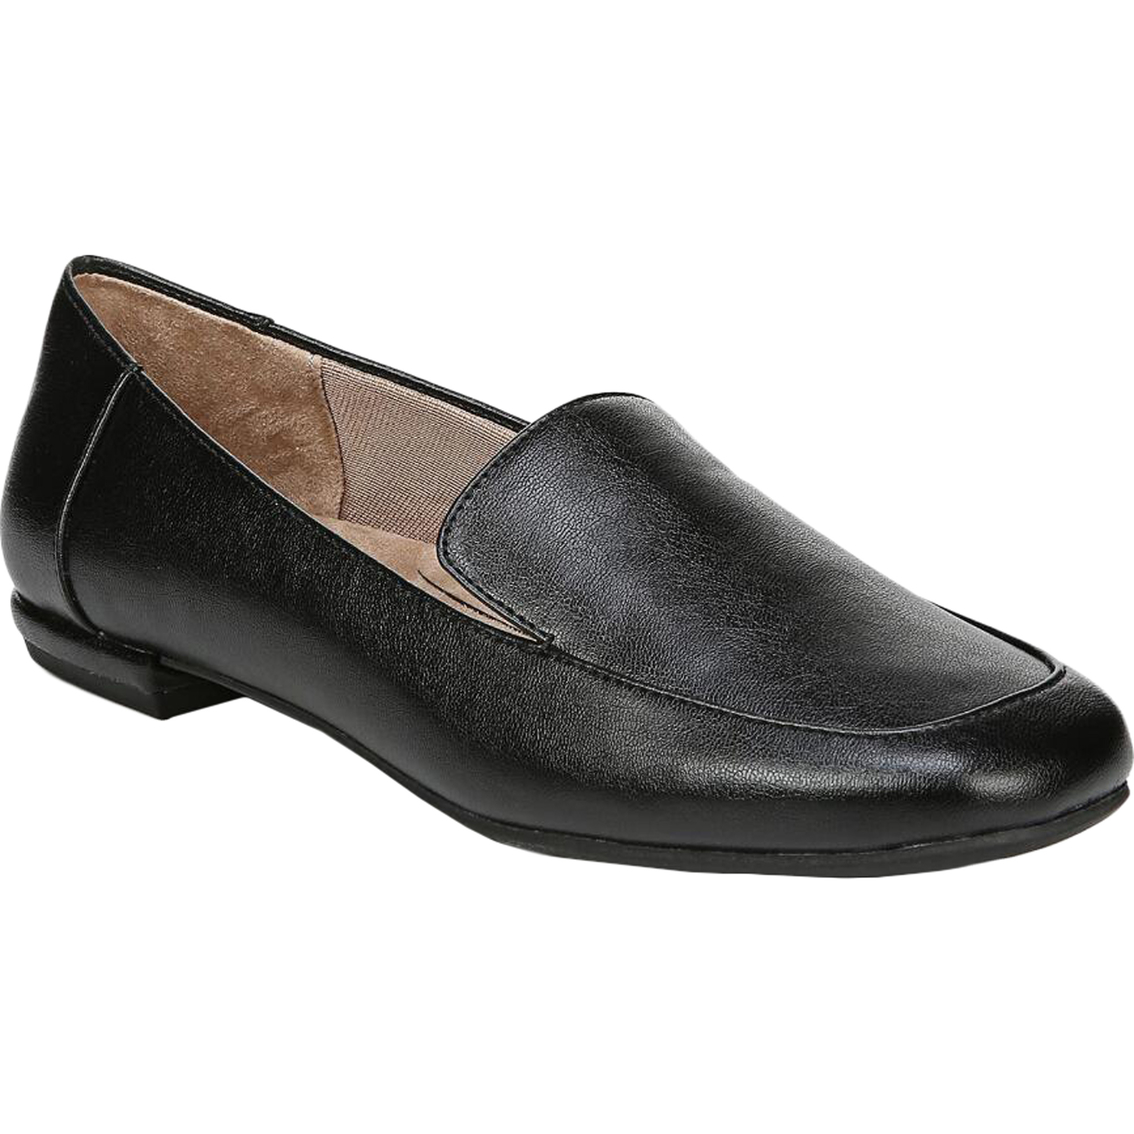 Lifestride Blakely Slip On Loafers | Flats | Shoes | Shop The Exchange